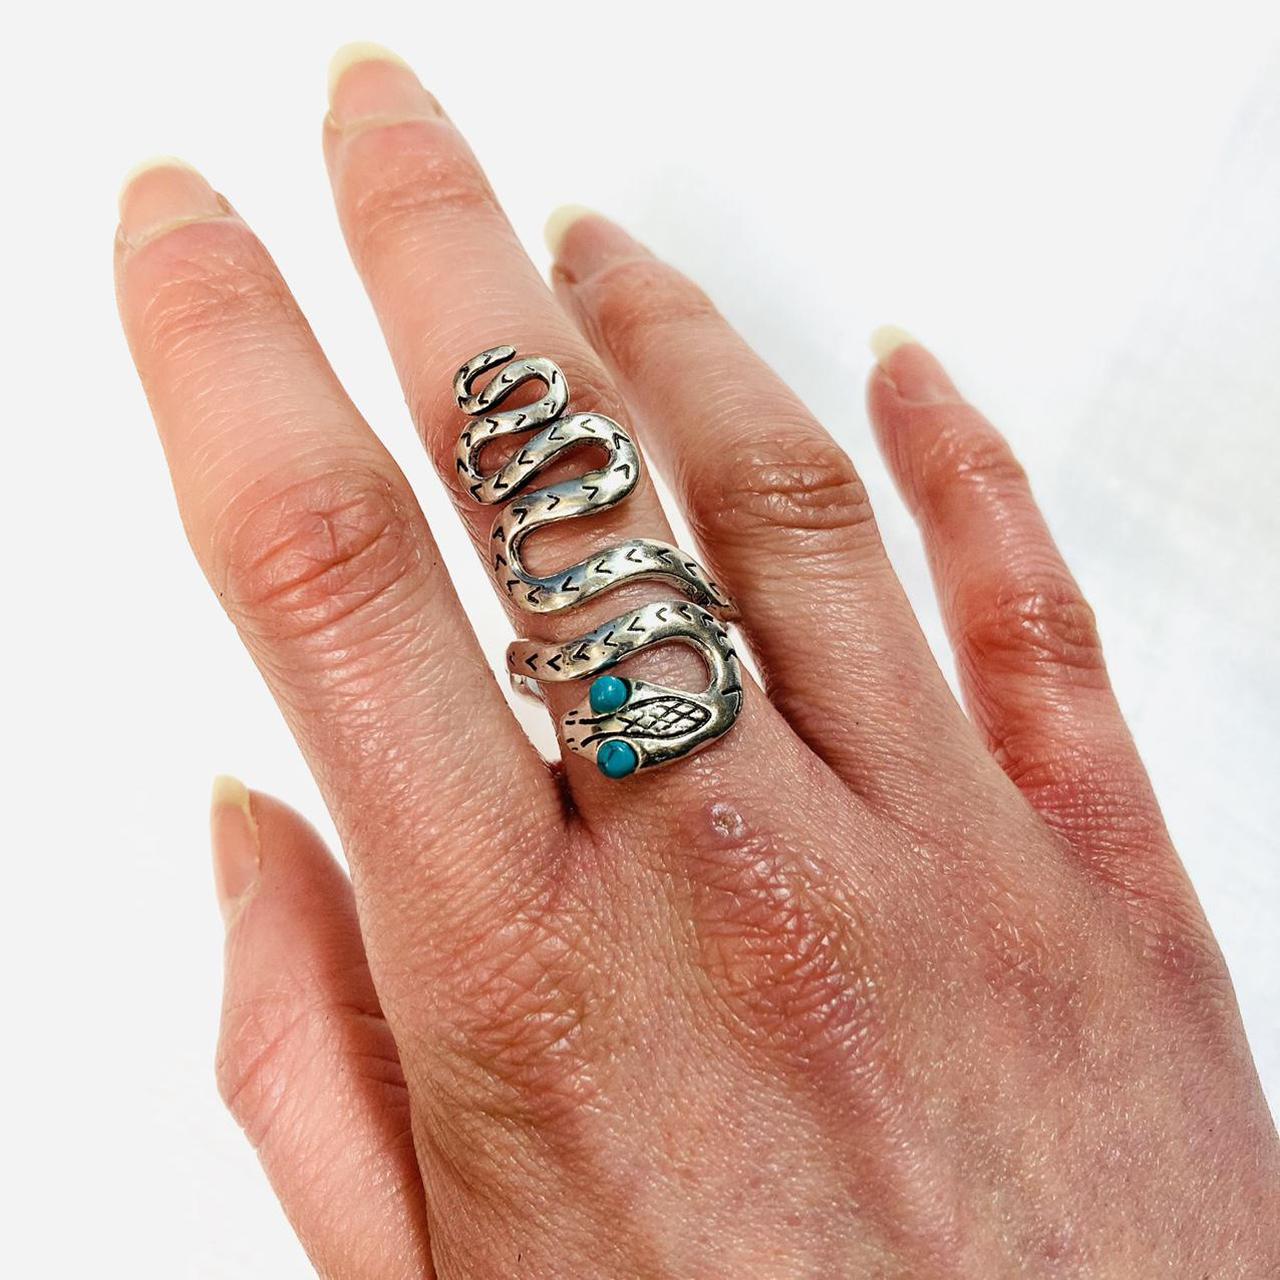 Product Image 1 - Silver adjustable size snake ring